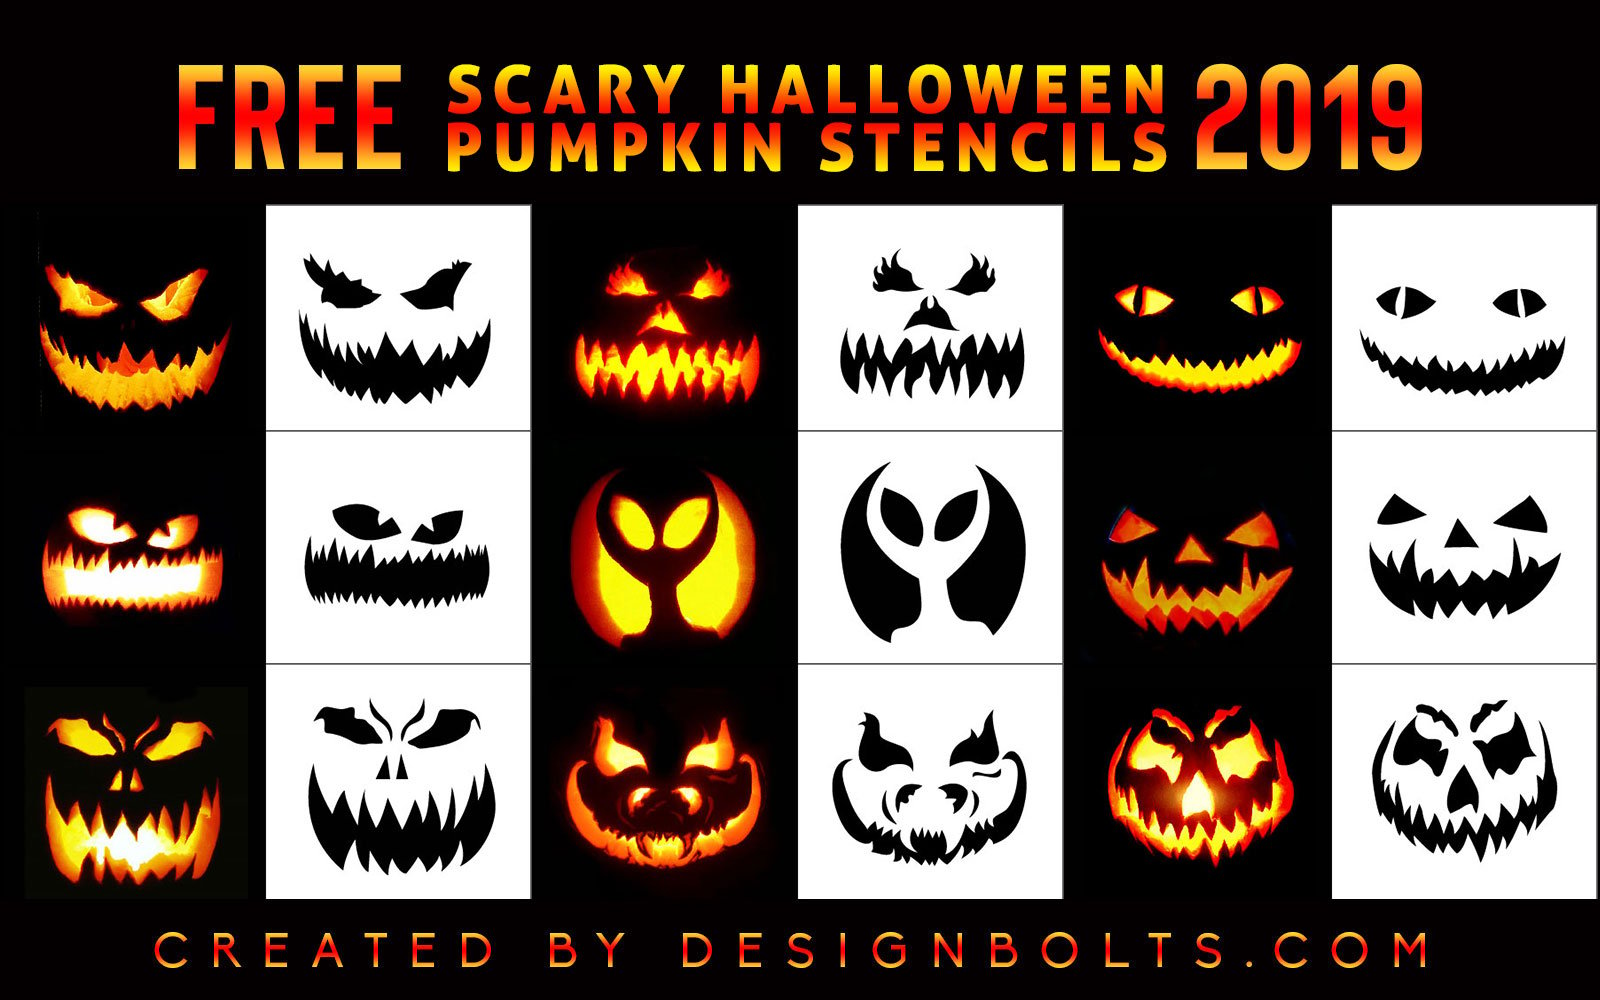 10 Free Scary Halloween Pumpkin Carving Stencils, Faces, Templates